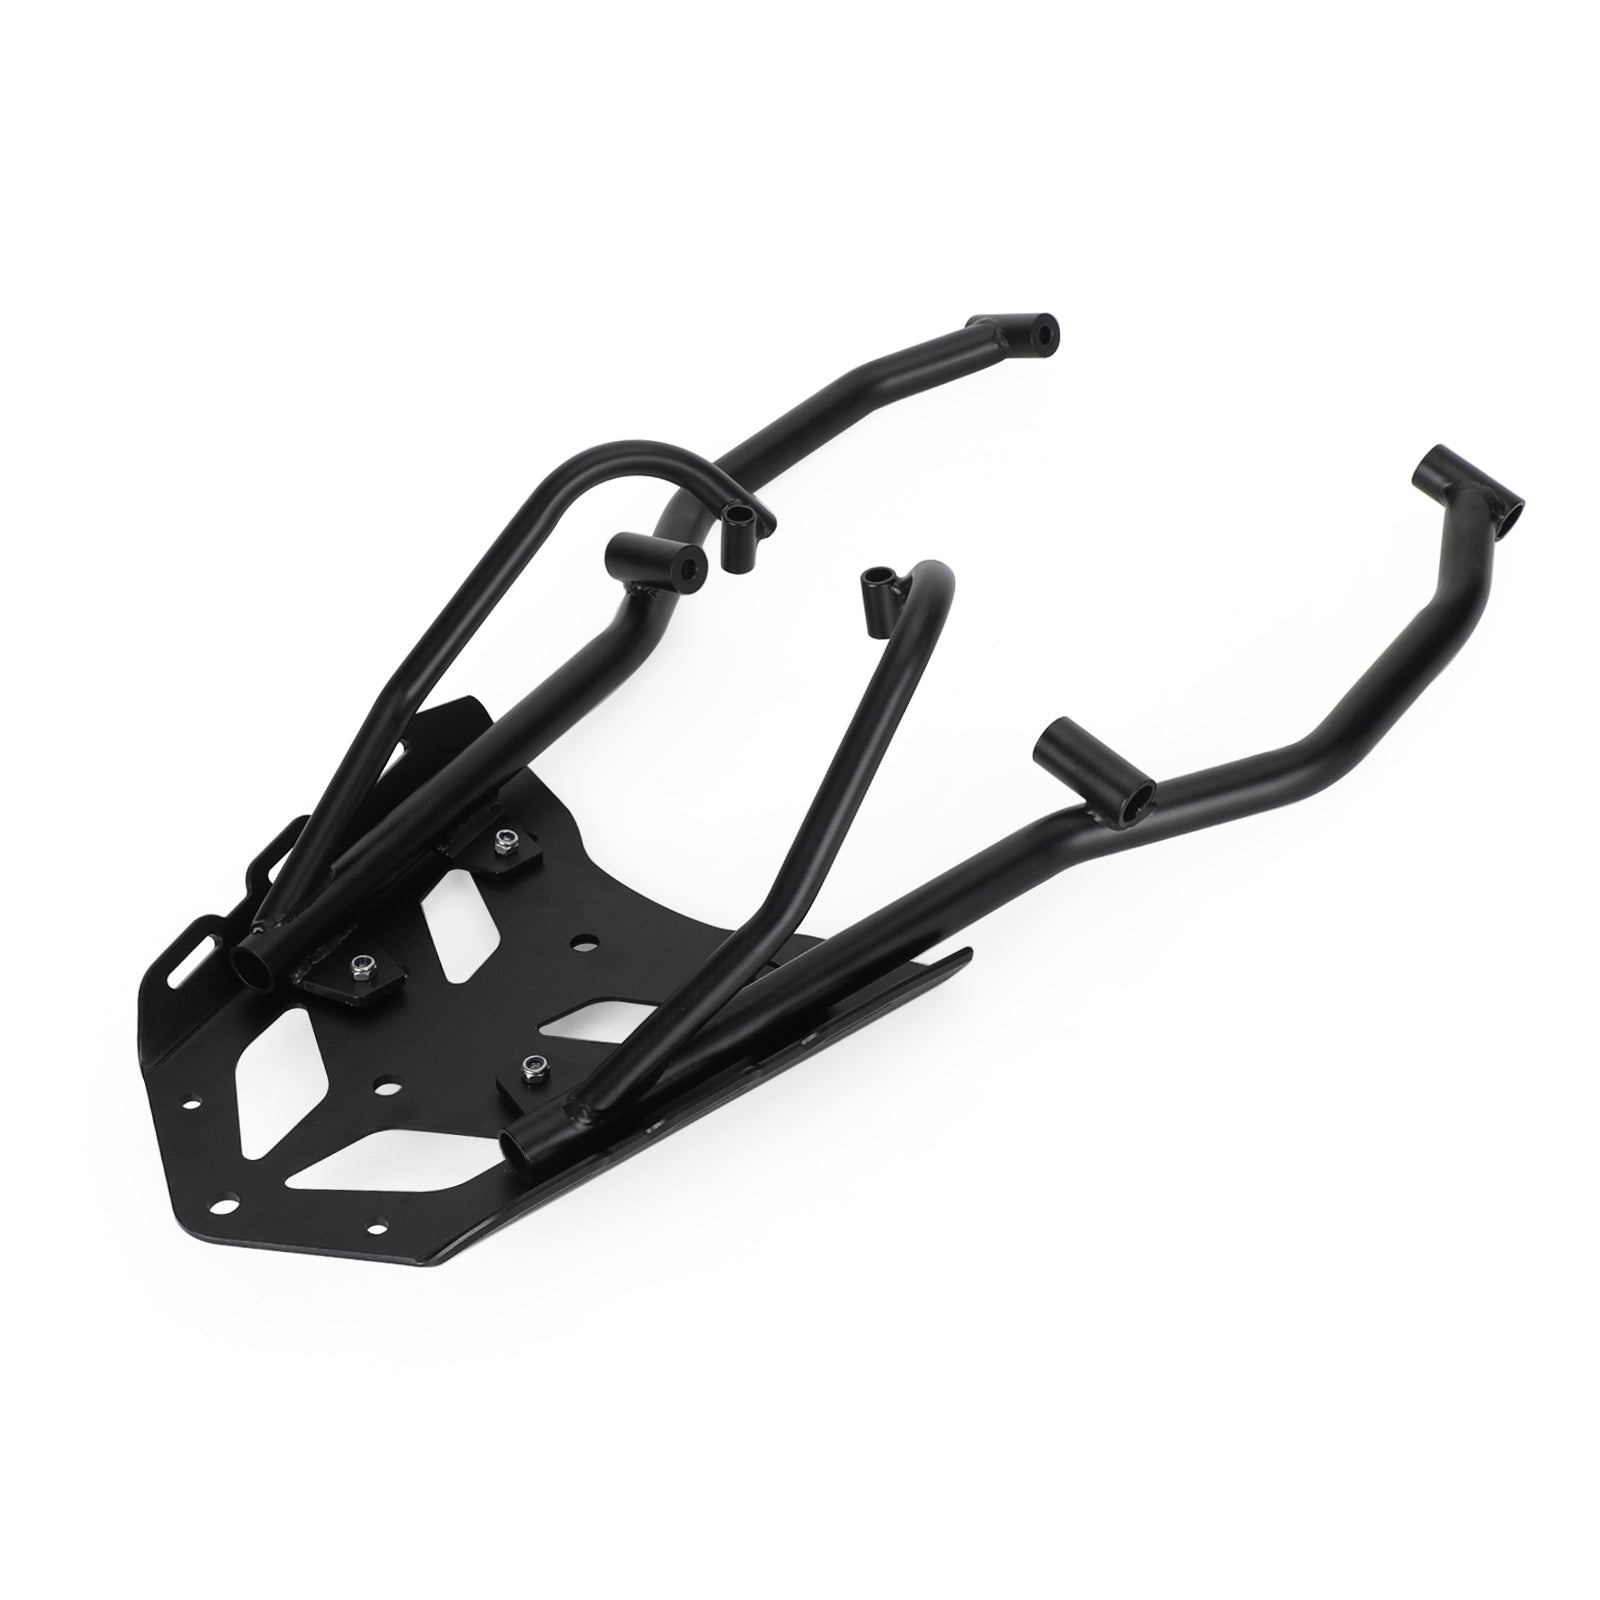 REAR STEEL LUGGAGE CARRY SUPPORT RACK FOR YAMAHA TENERE 700 T7 2019 2020 2021 Generic